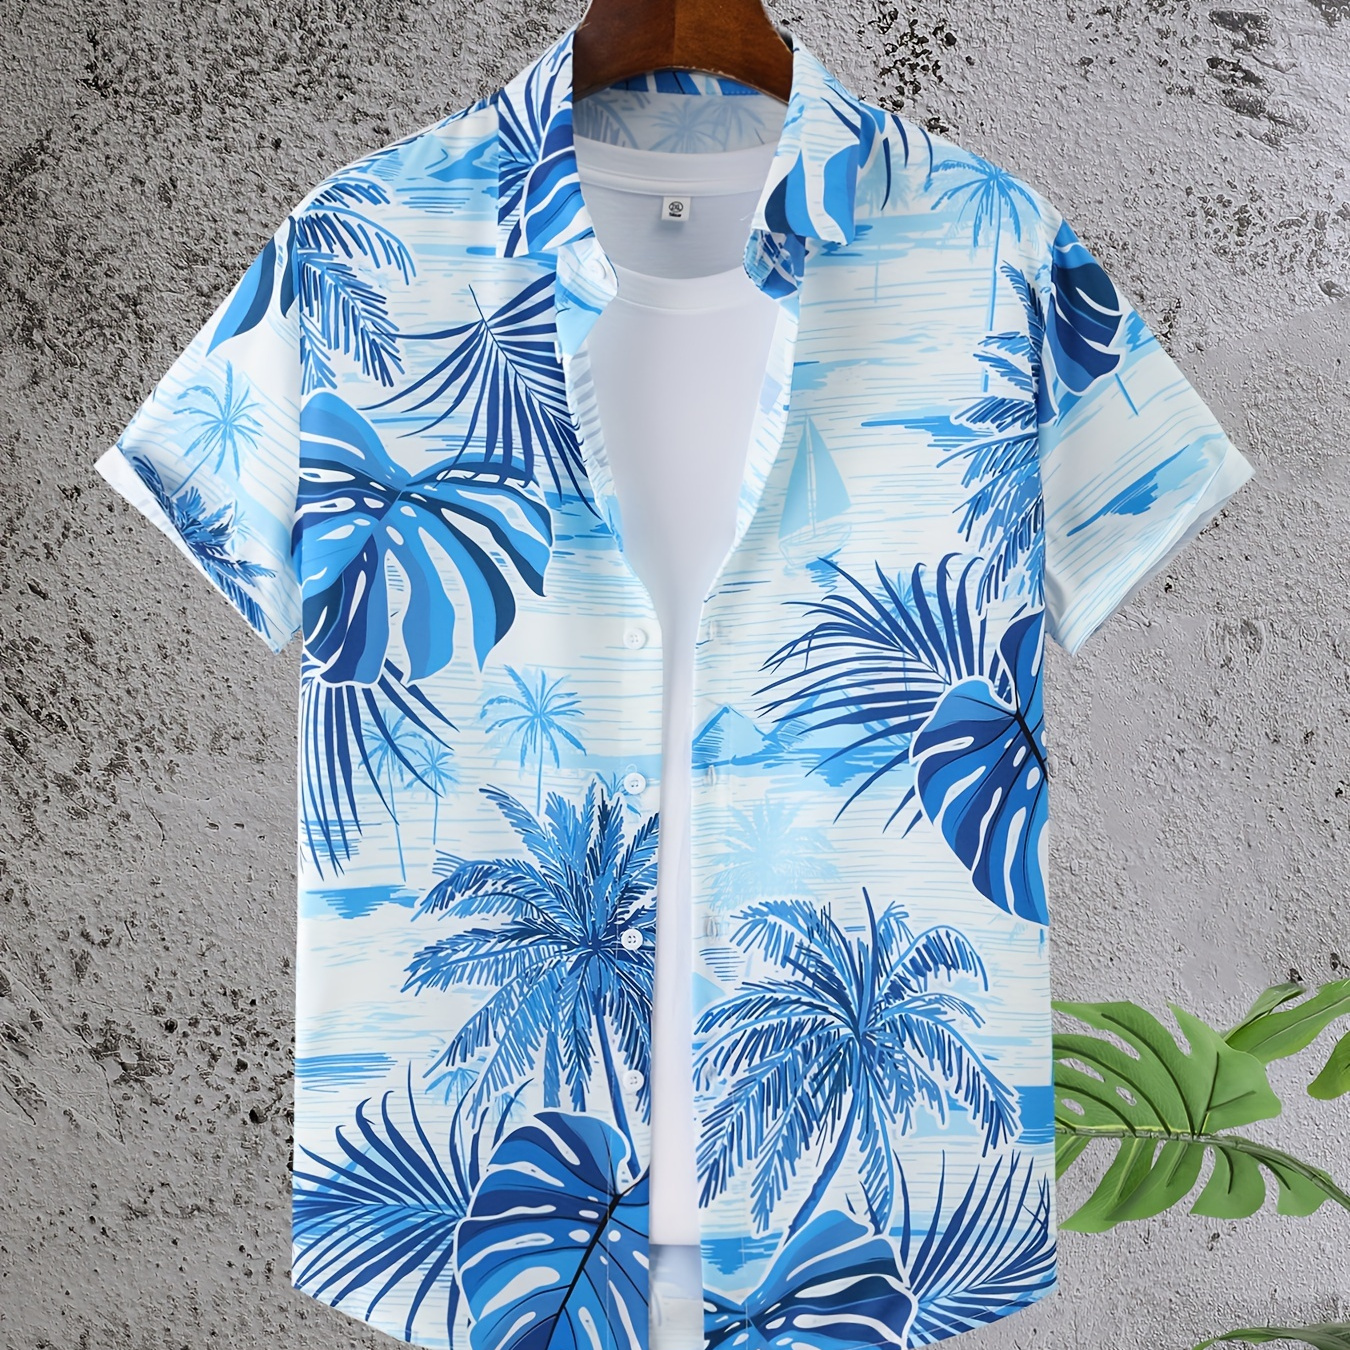 

Leaf Pattern Men's Fashionable And Simple Short Sleeve Button Casual Lapel Shirt, Trendy And Versatile, Suitable For Summer Dates, Beach Holiday, As Gifts, Men's Clothing